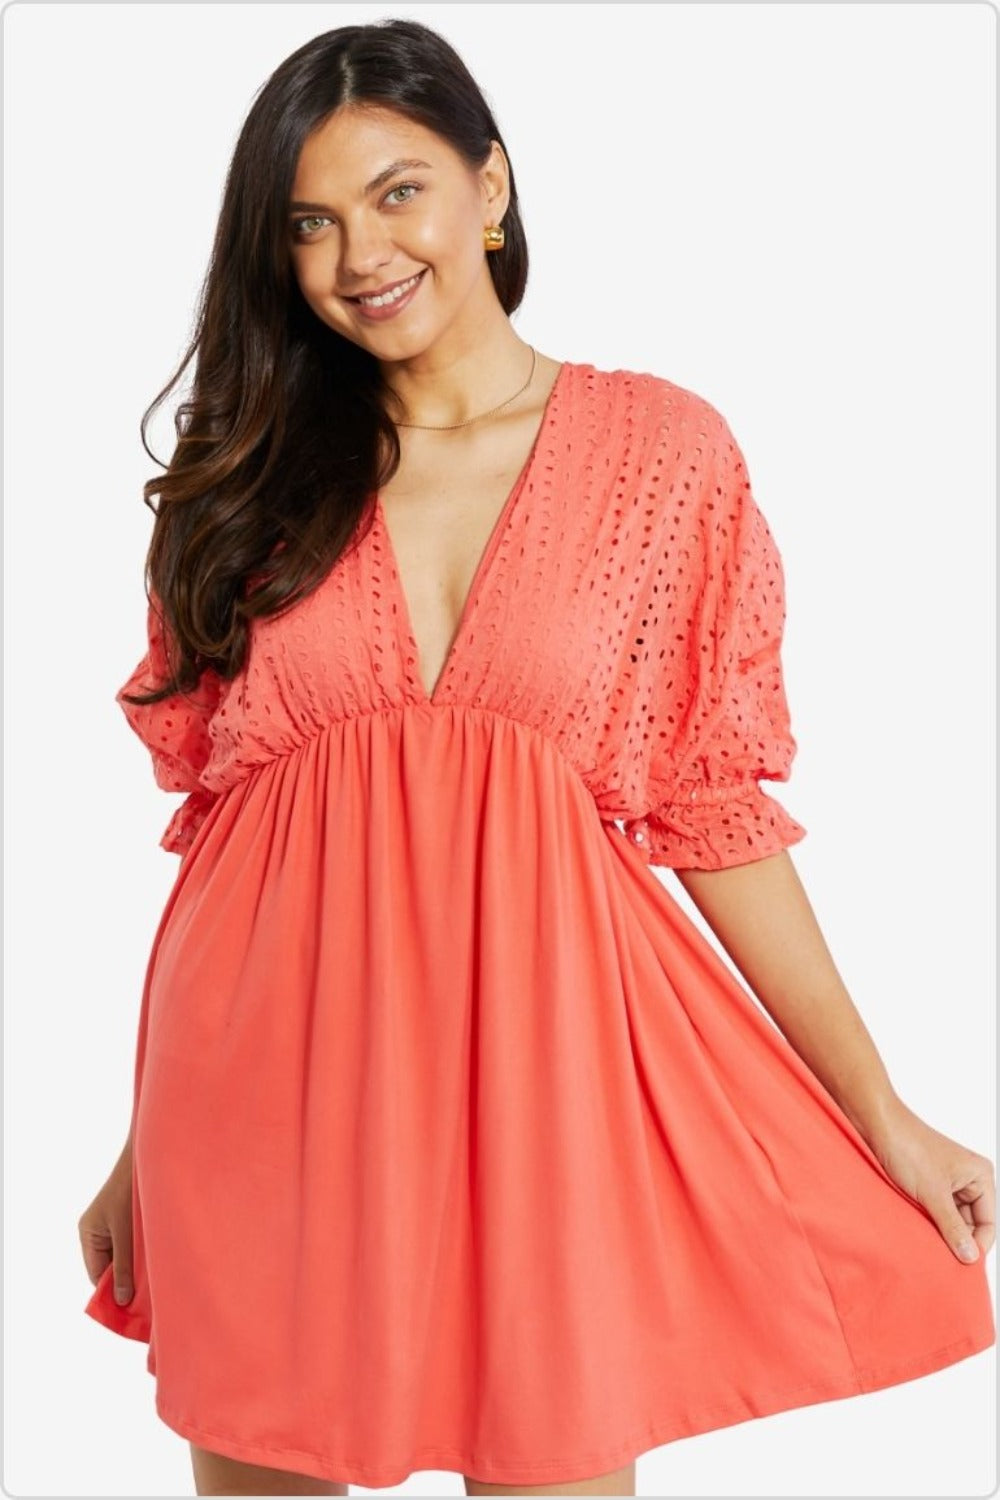 Woman in a coral dress with eyelet embroidery and puff sleeves, embodying a breezy, bohemian summer style.